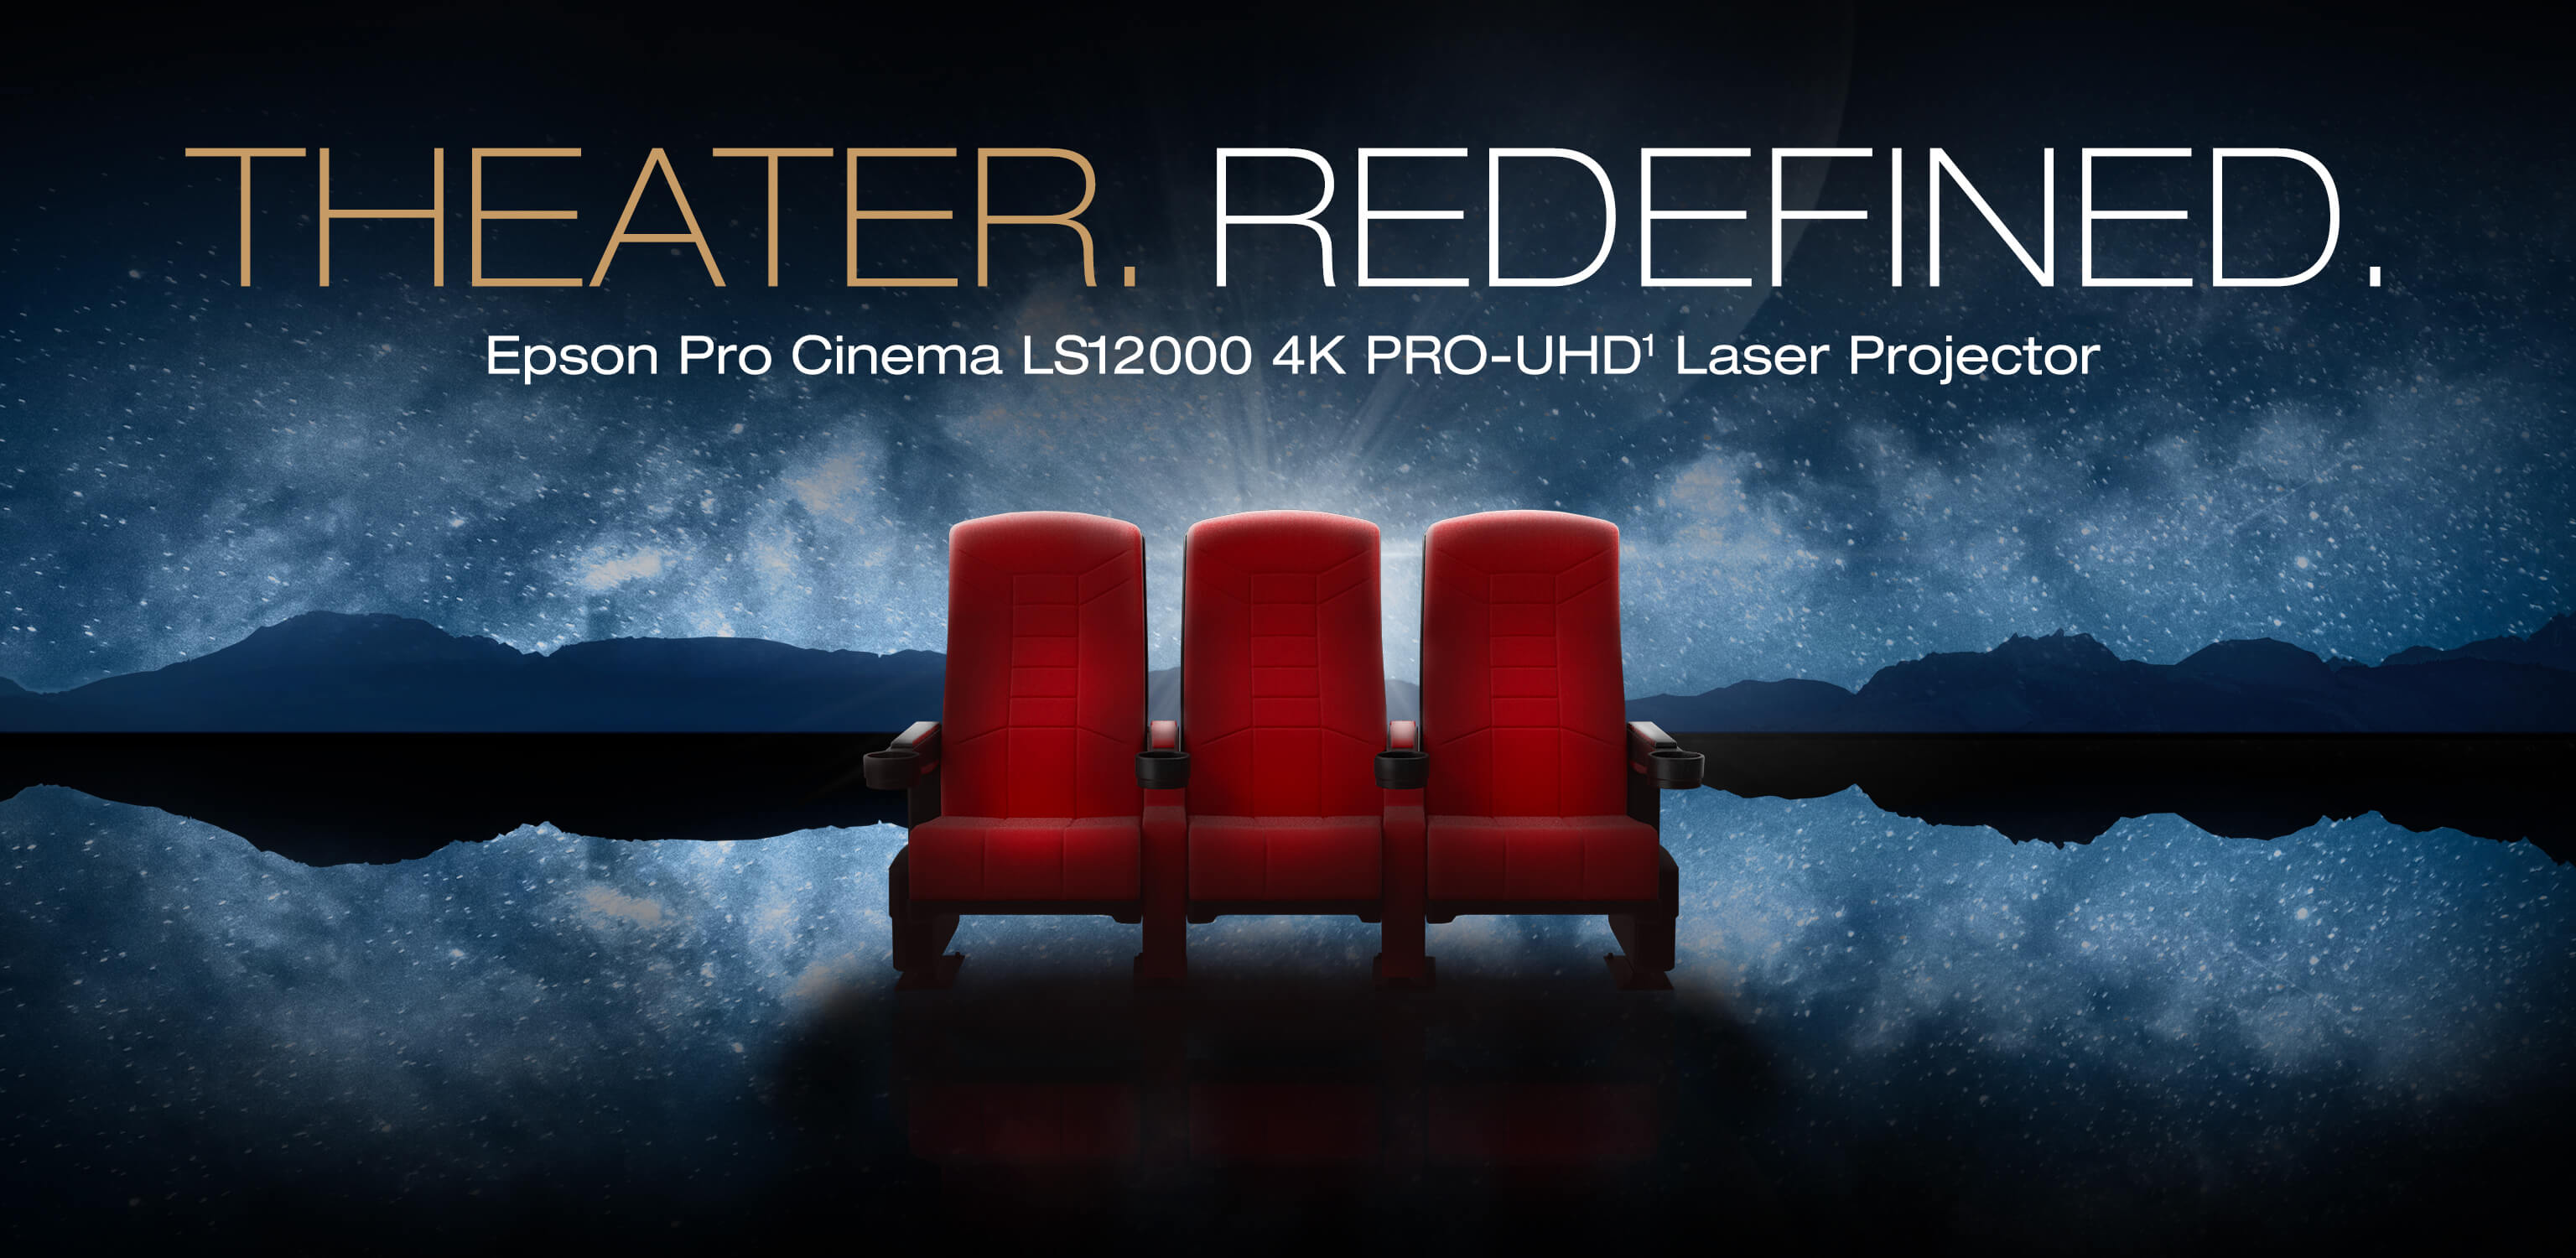 Theater. Redefined. Epson Pro Cinema LS12000 4K PRO-UHD1 Laser Projector